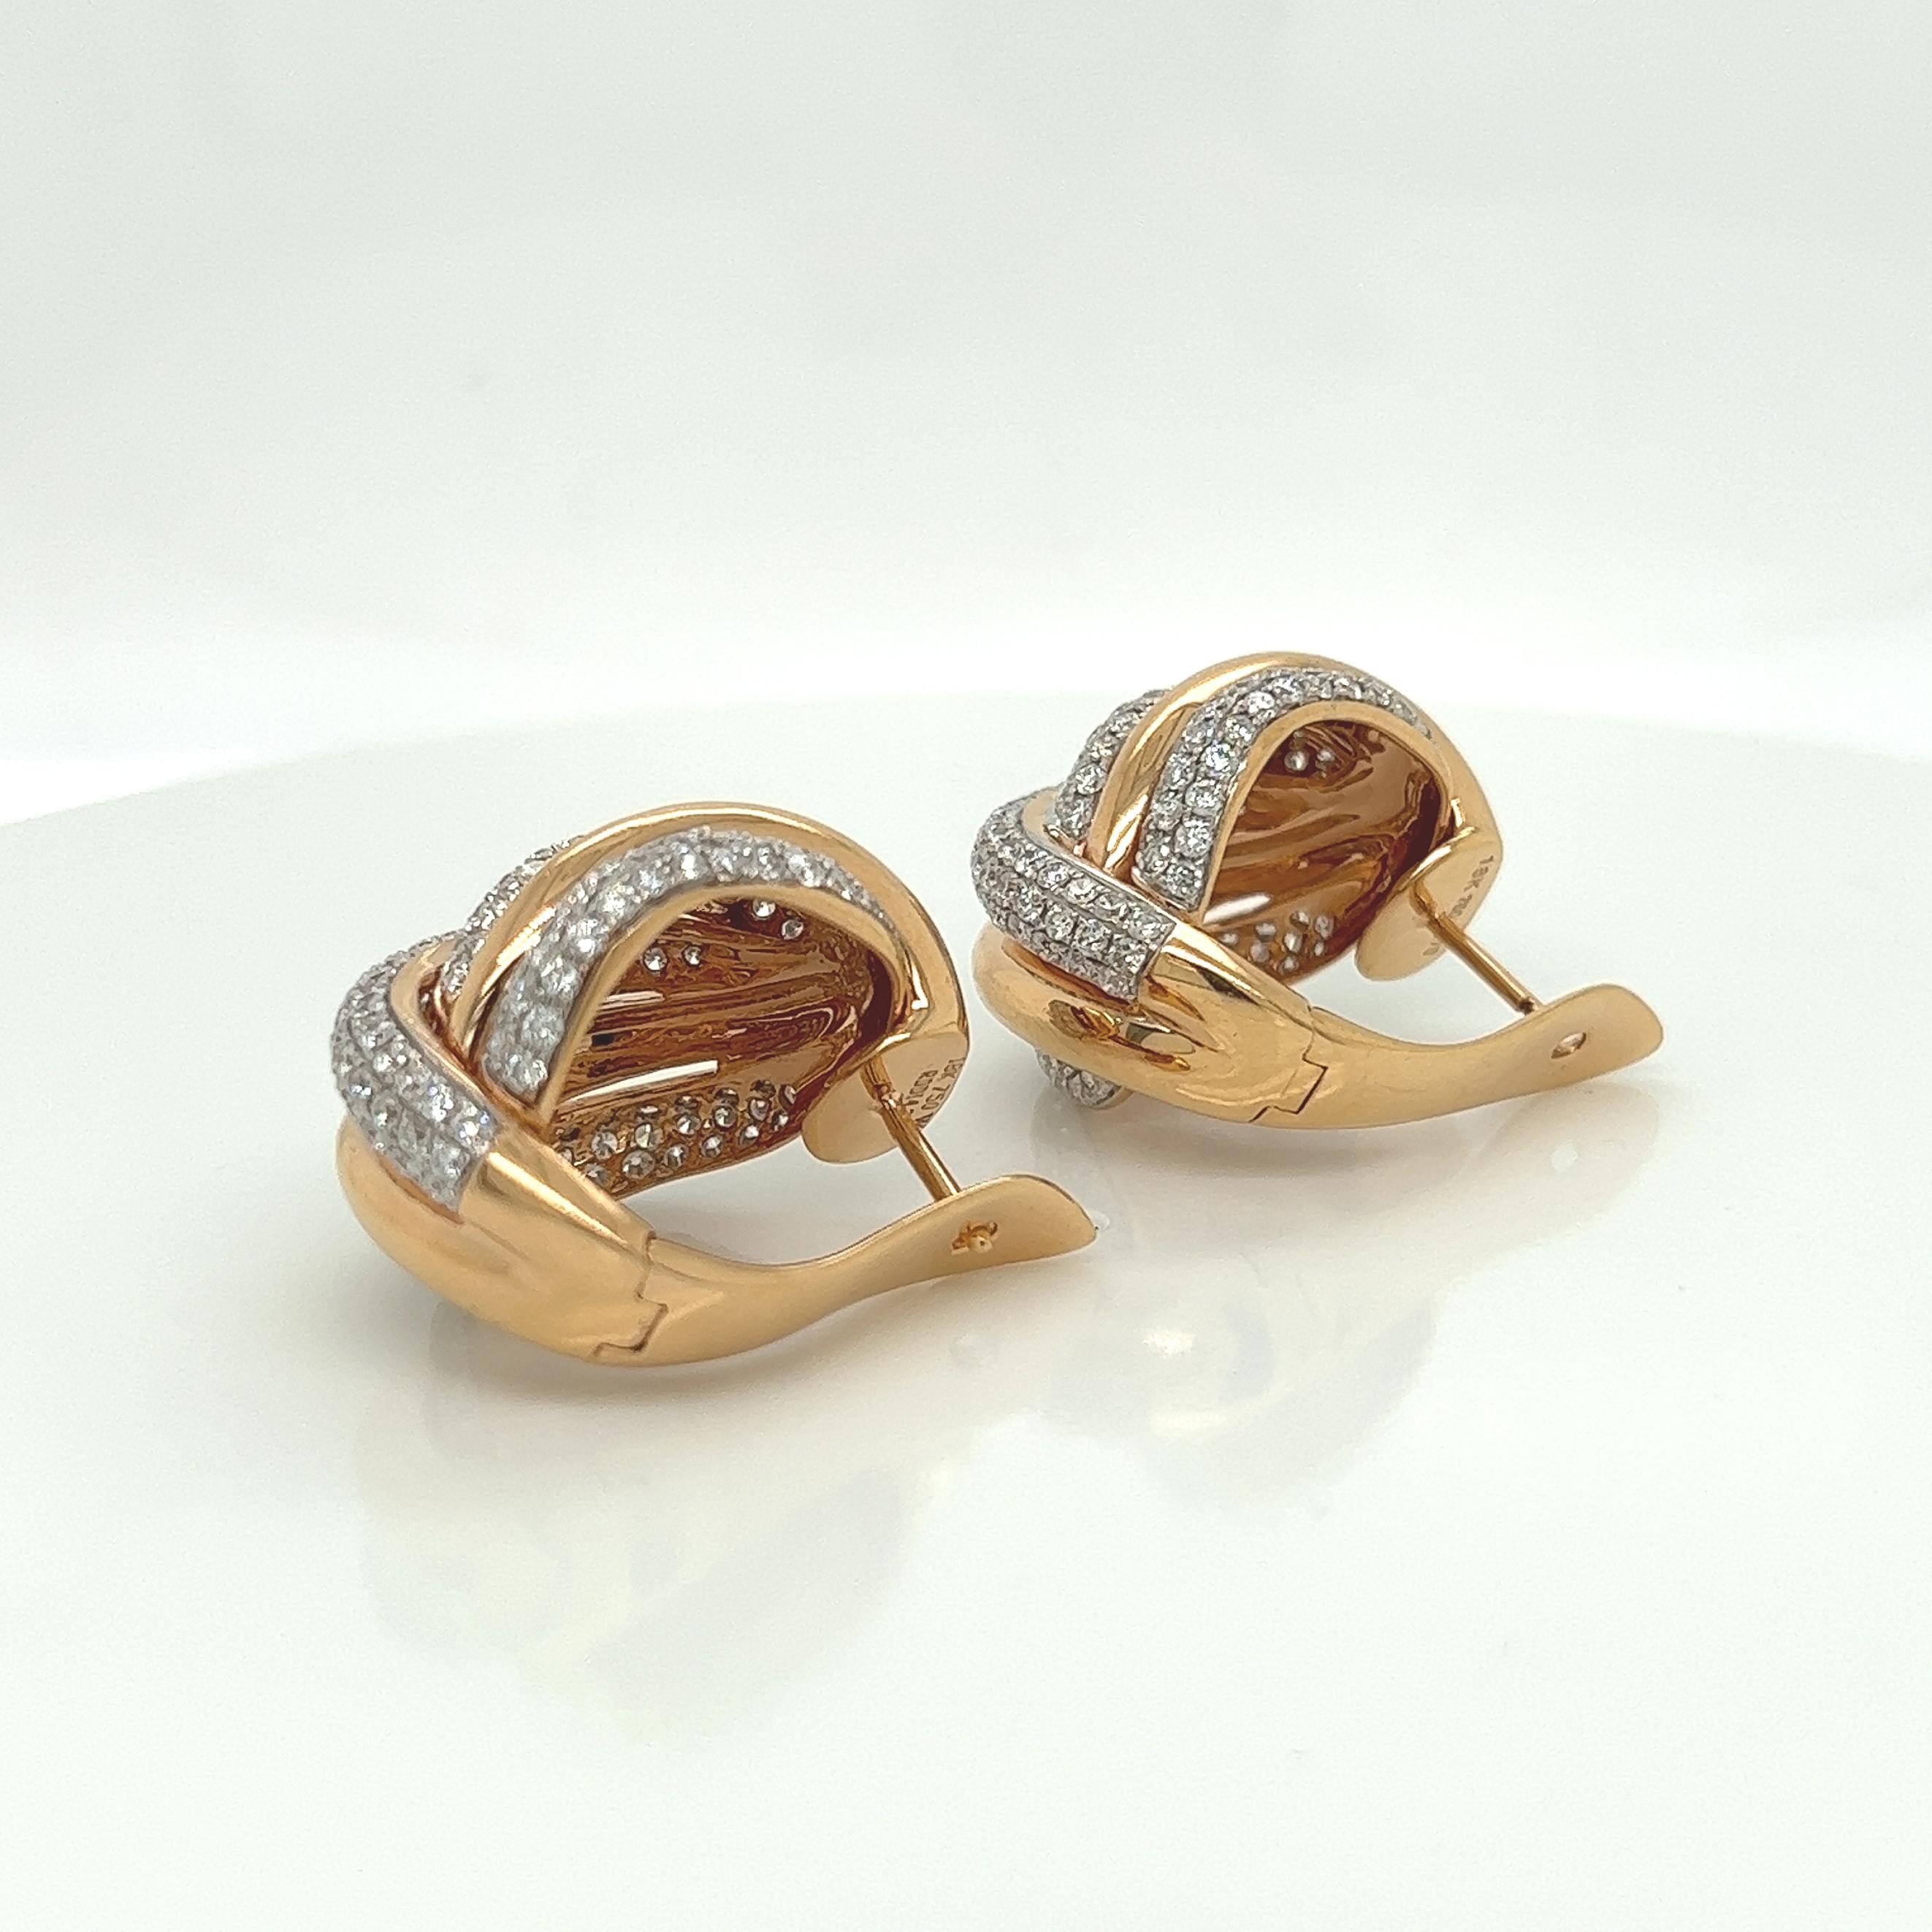 4.25 Carat Diamond and Gold Earrings in 18K Rose Gold For Sale 1